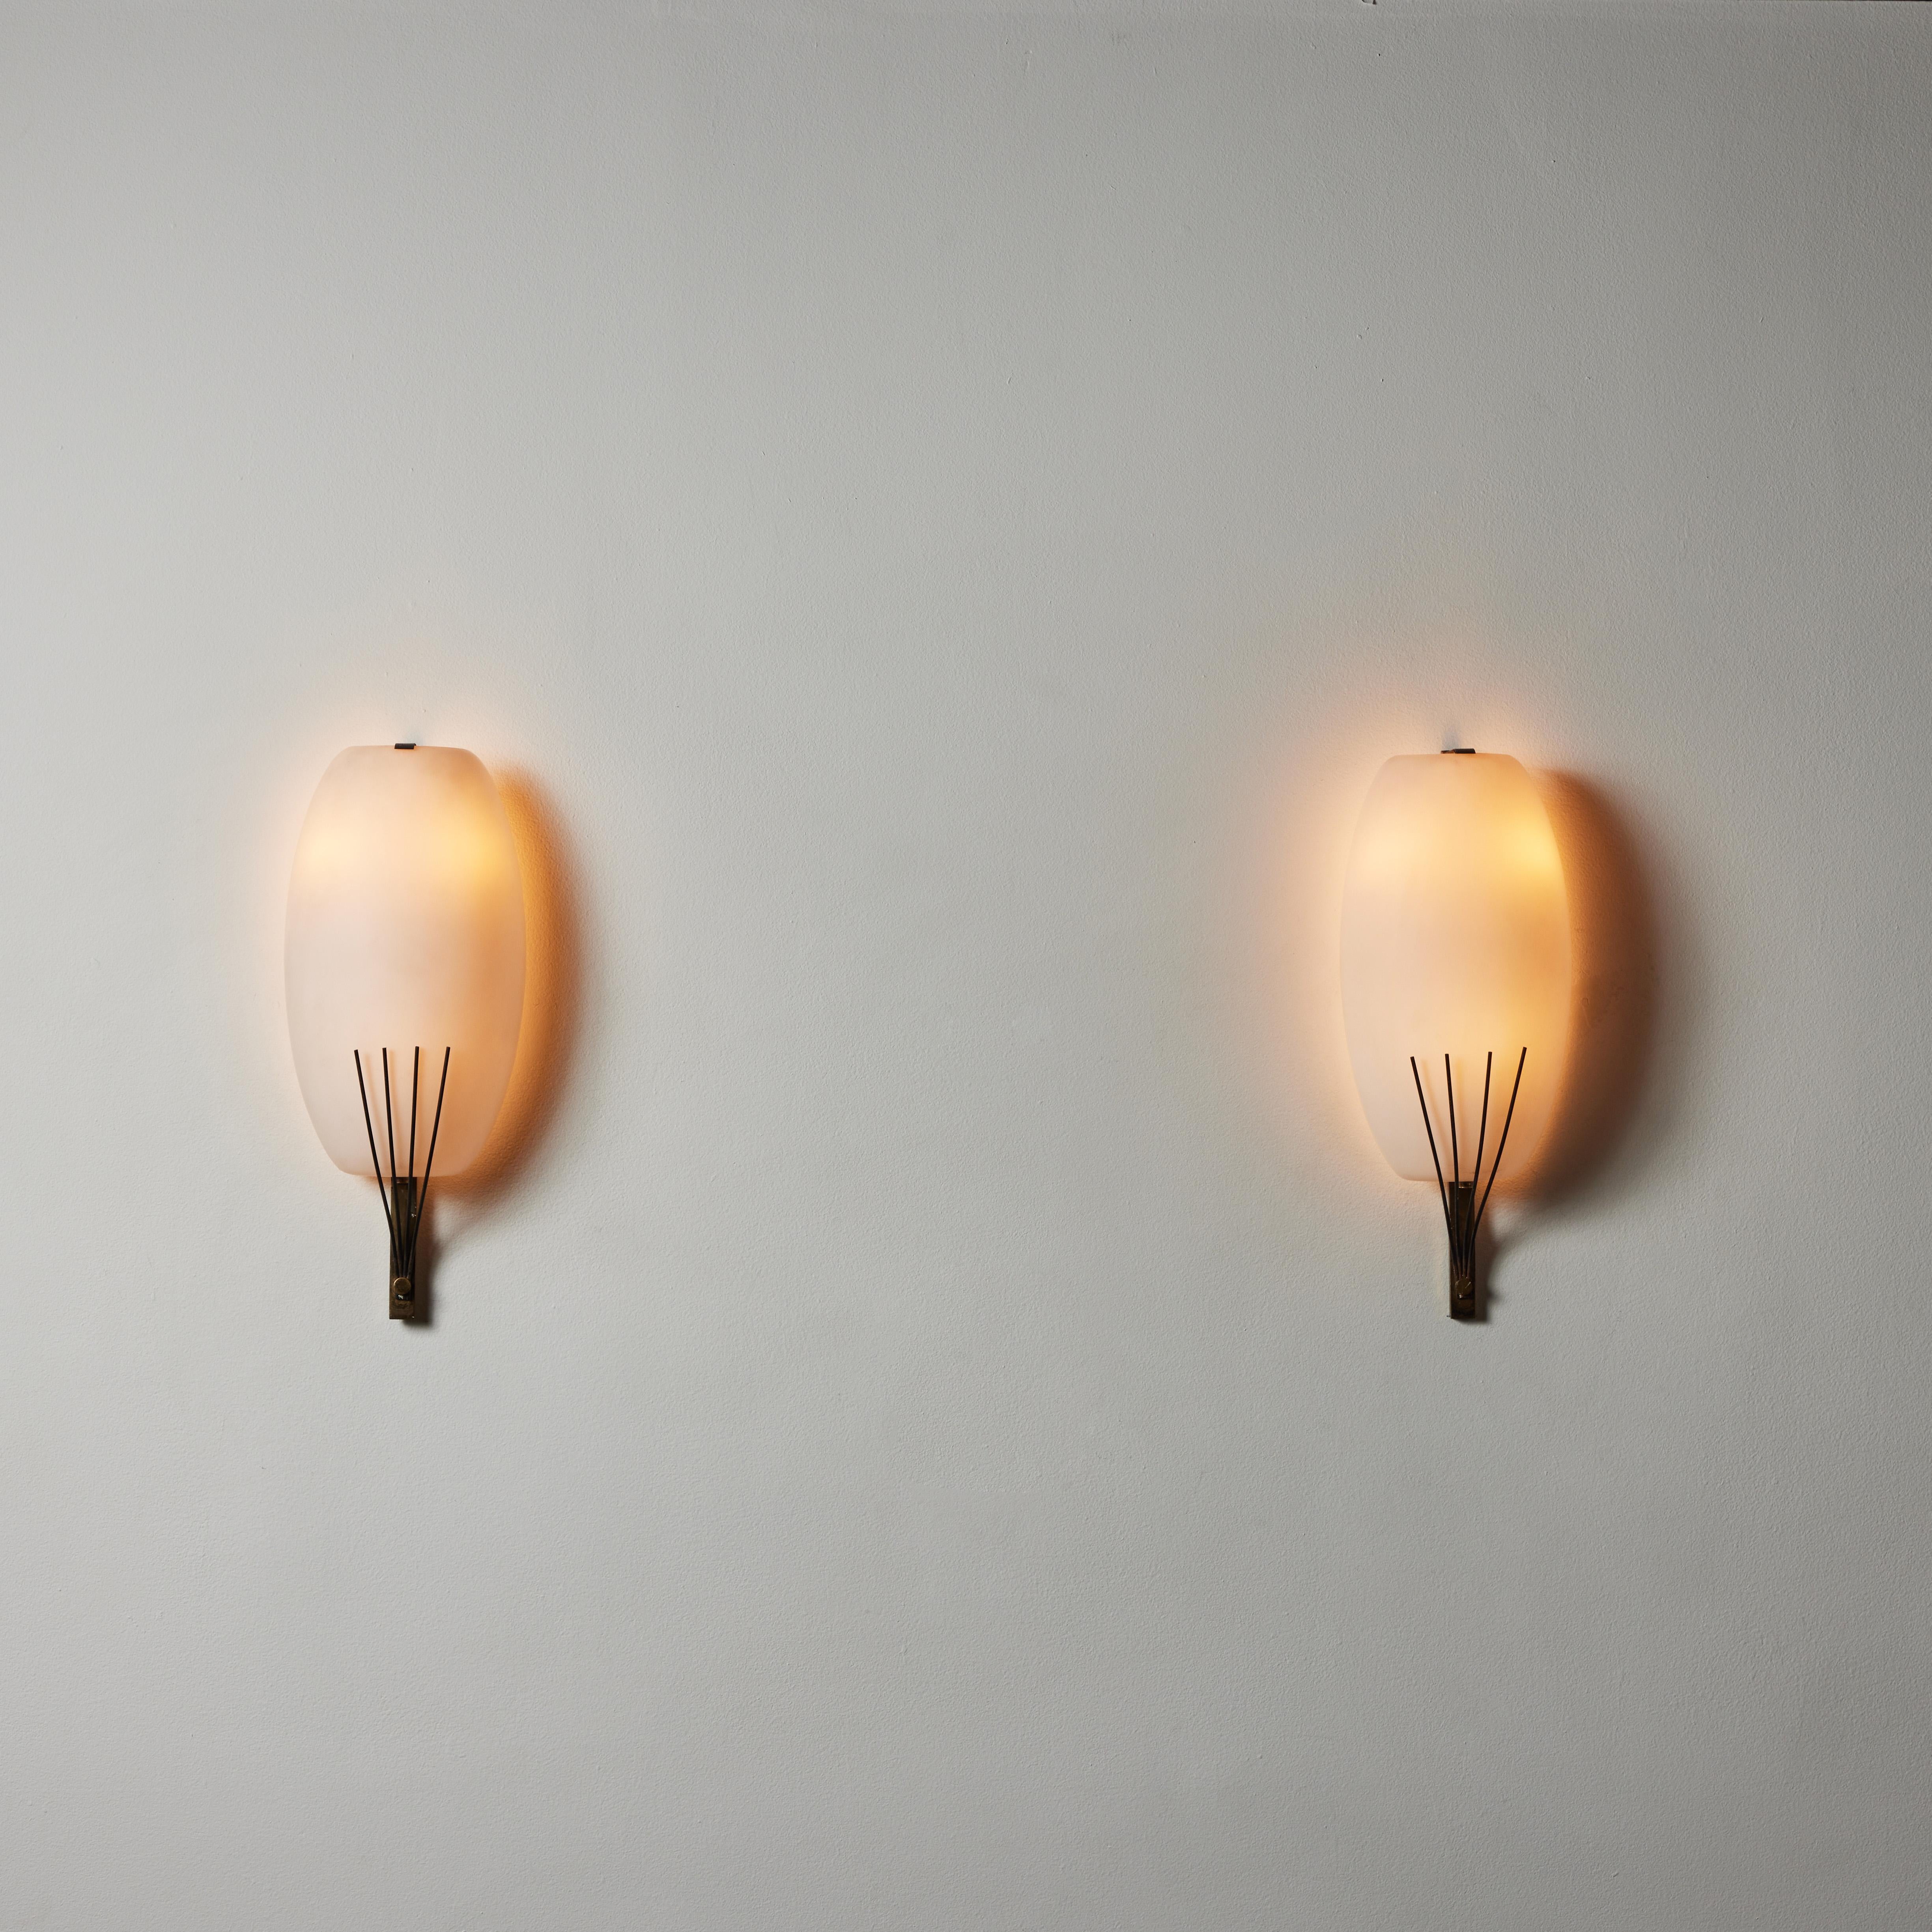 Pair of Sconces by Stilnovo. Manufactured in Italy, circa 1960's. Brushed satin glass, brass. Rewired for U.S. standards. We recommend three E12 bulbs 25w maximum bulbs per fixture. Bulbs not provided.